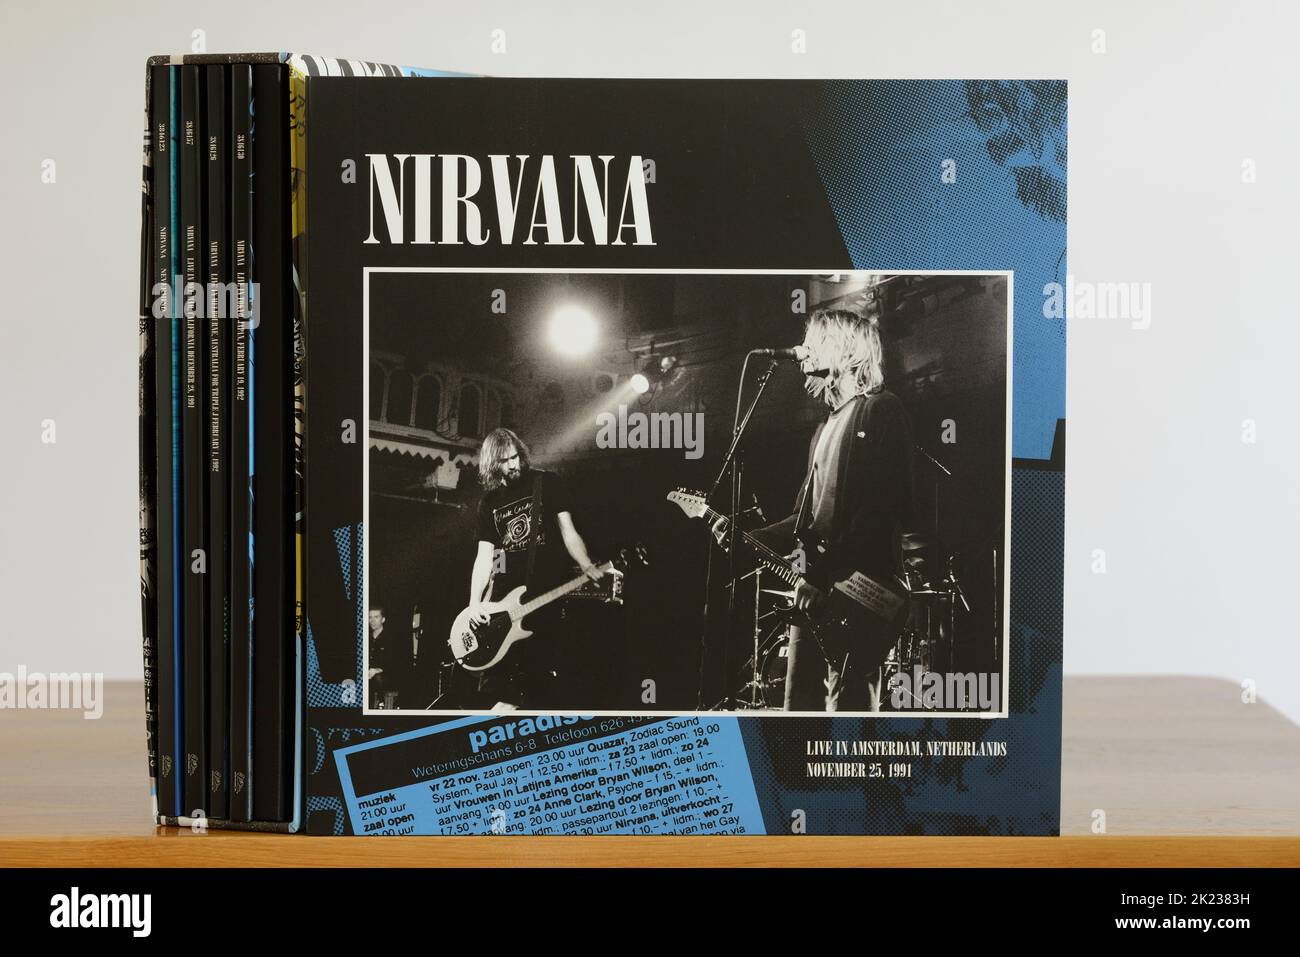 Nirvana-Vinyl-Box-Set. Note that I do not have a property release on this image and it may be used for editorial only. You cannot use this image for c Stock Photo